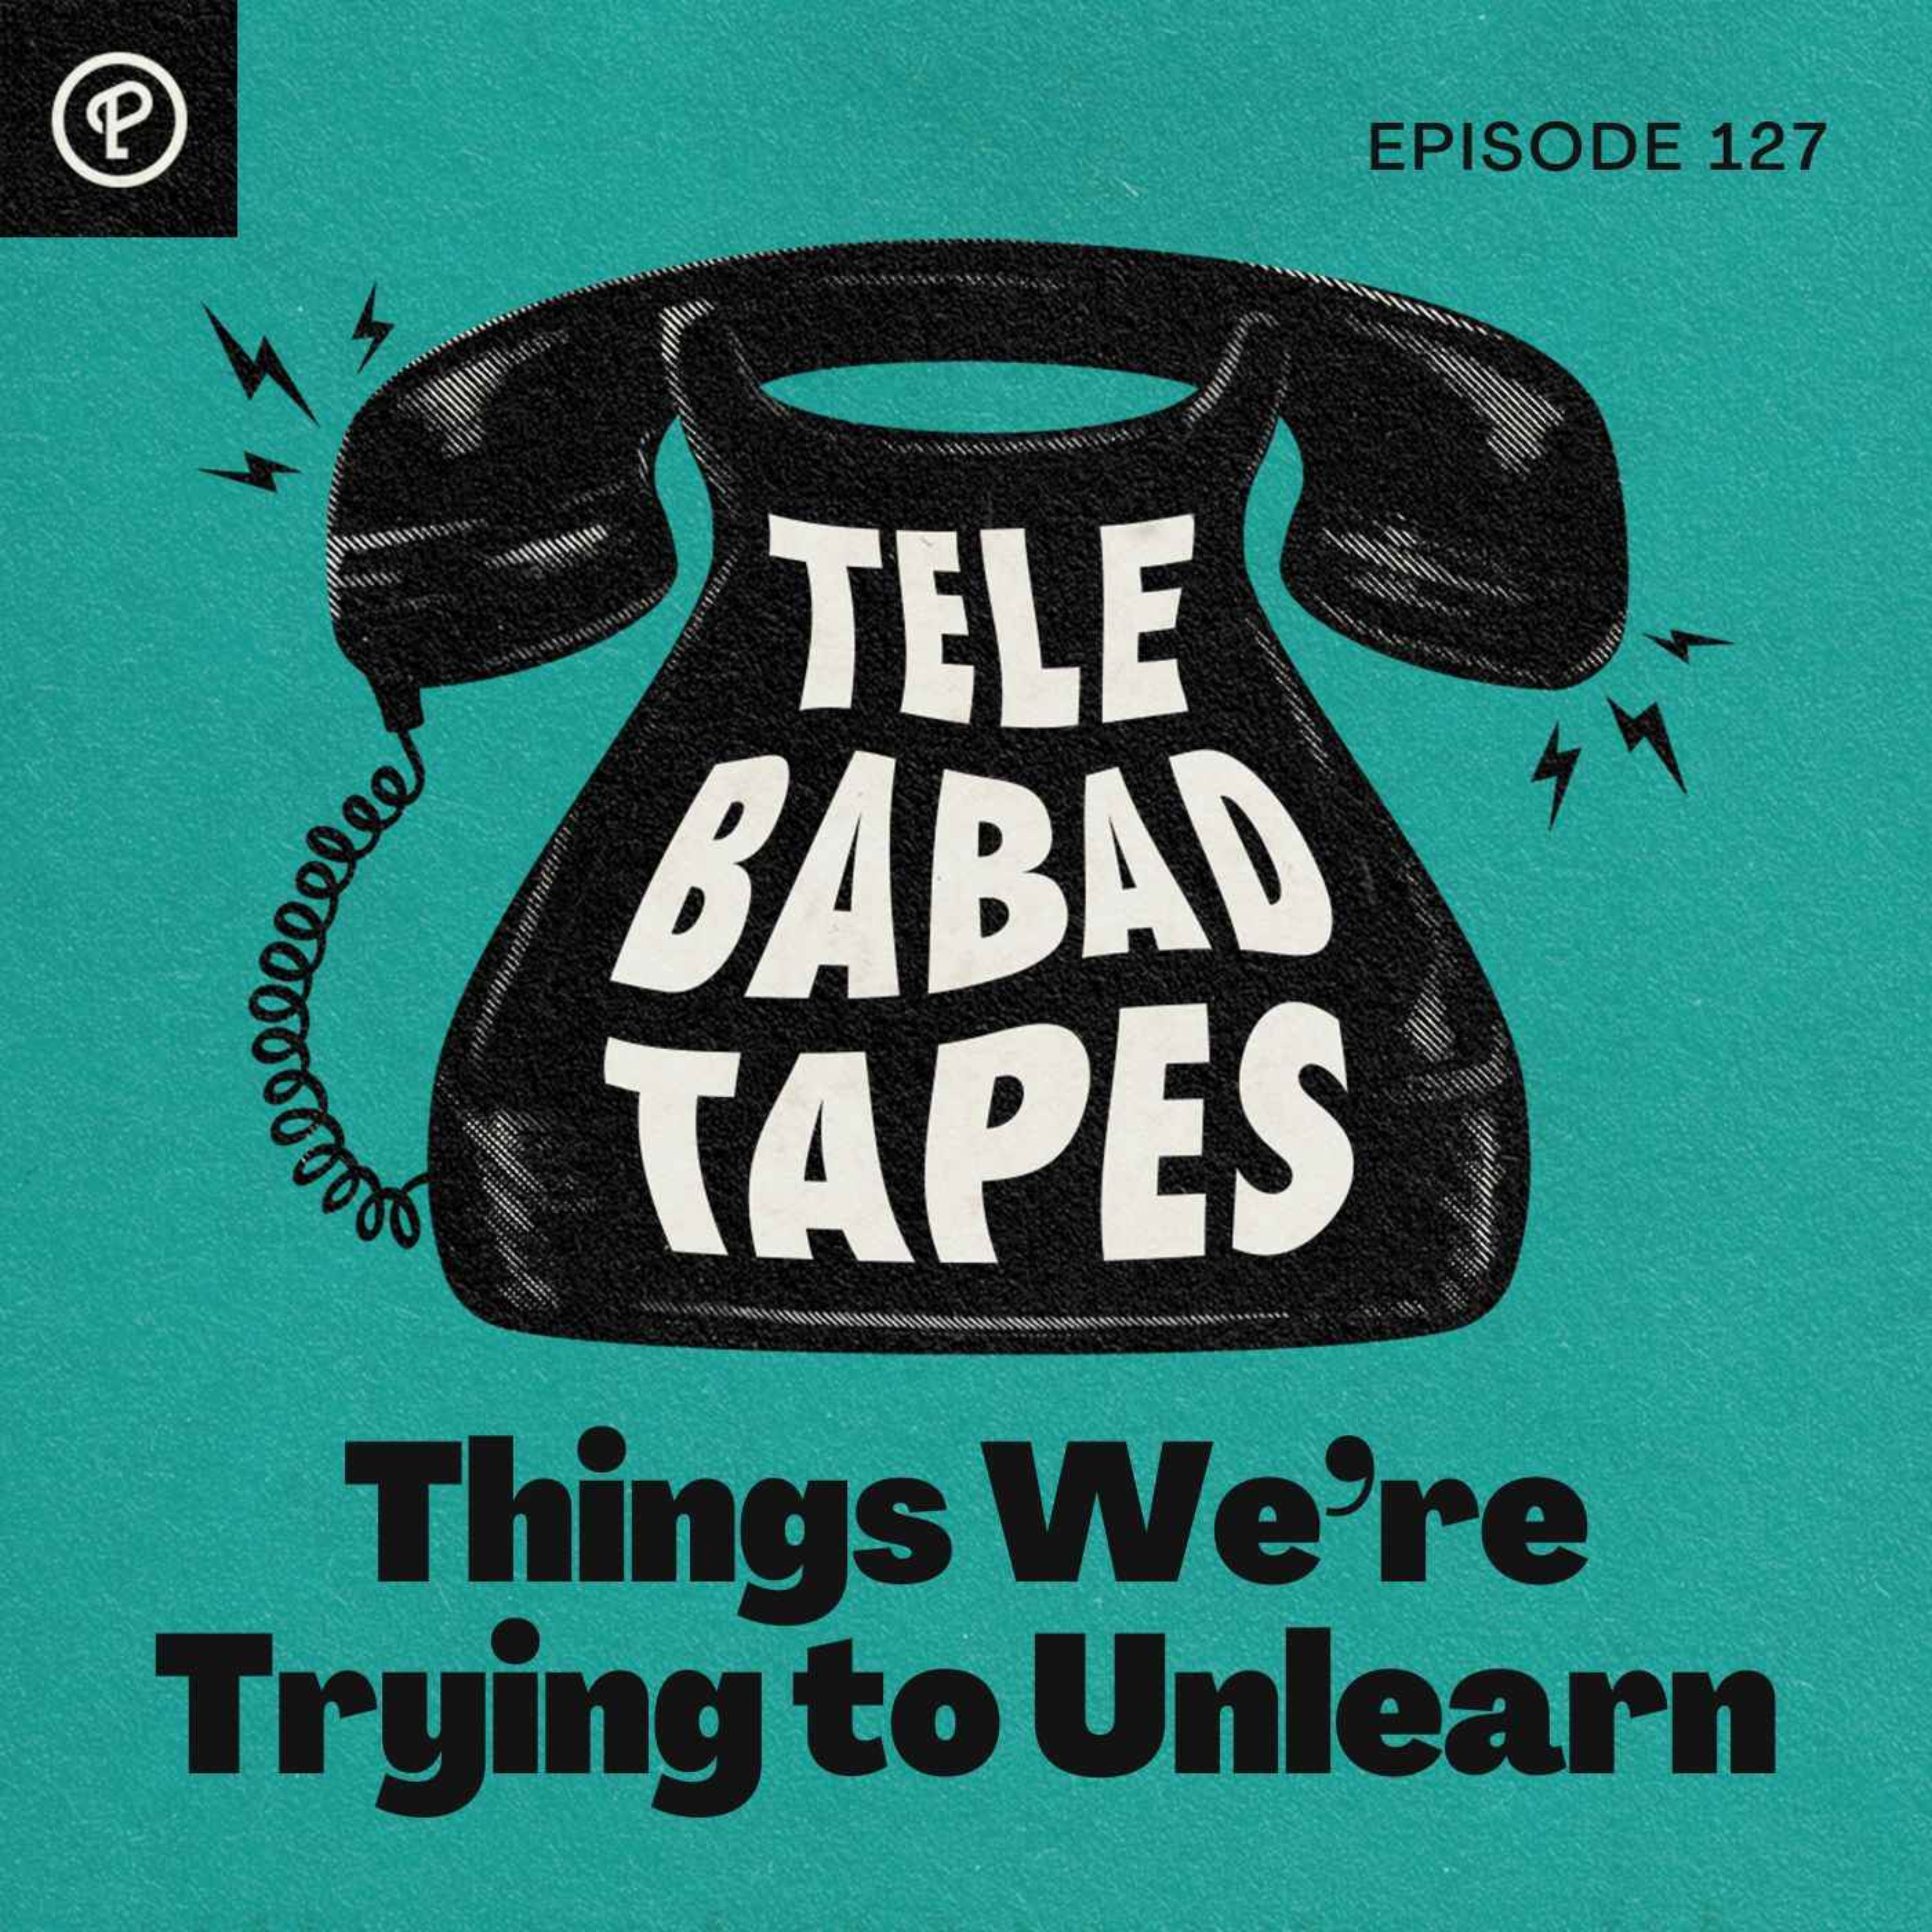 Episode 127: Things We’re Trying To Unlearn